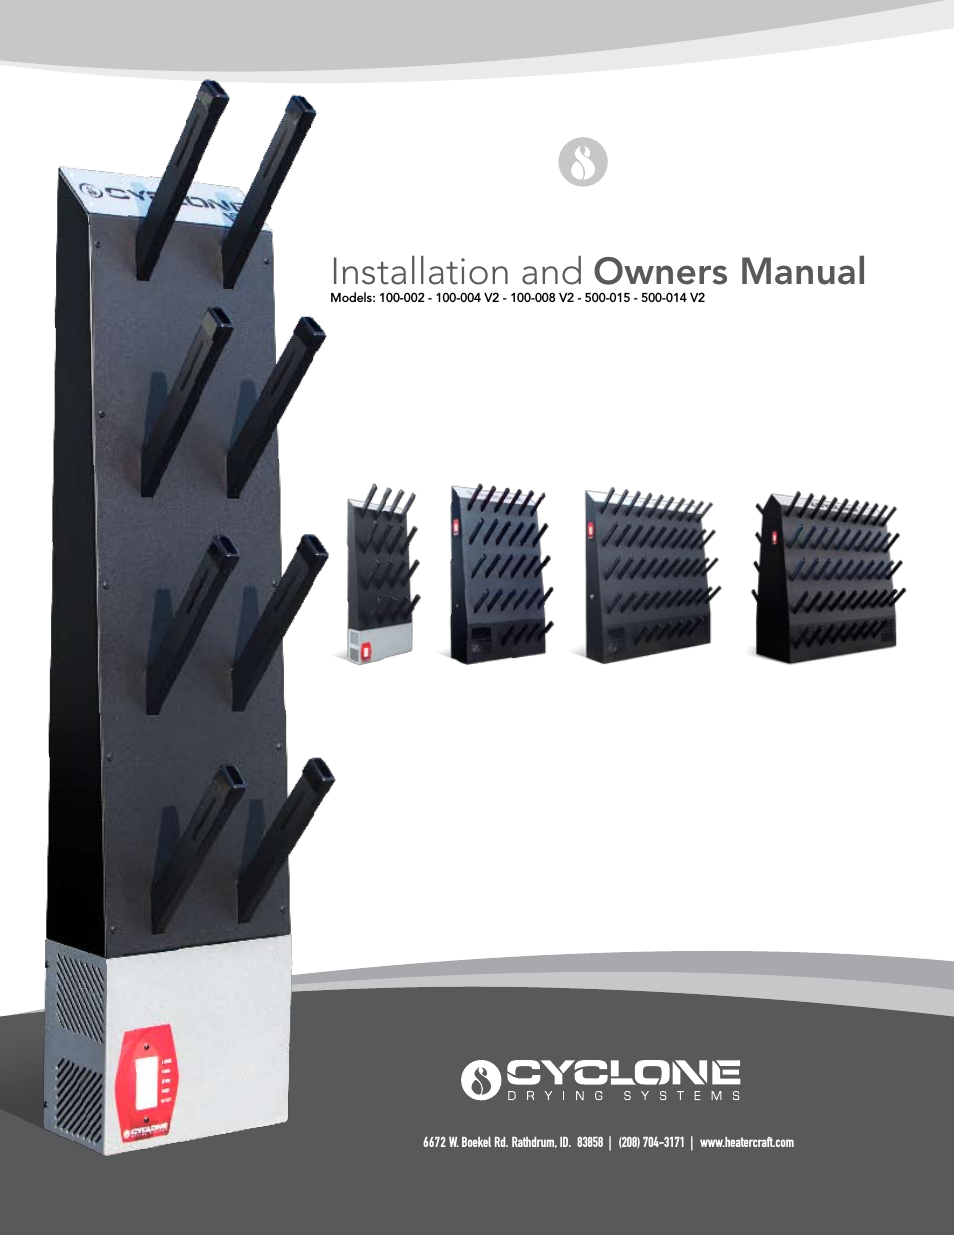 100-008 V2 Cyclone drying systems